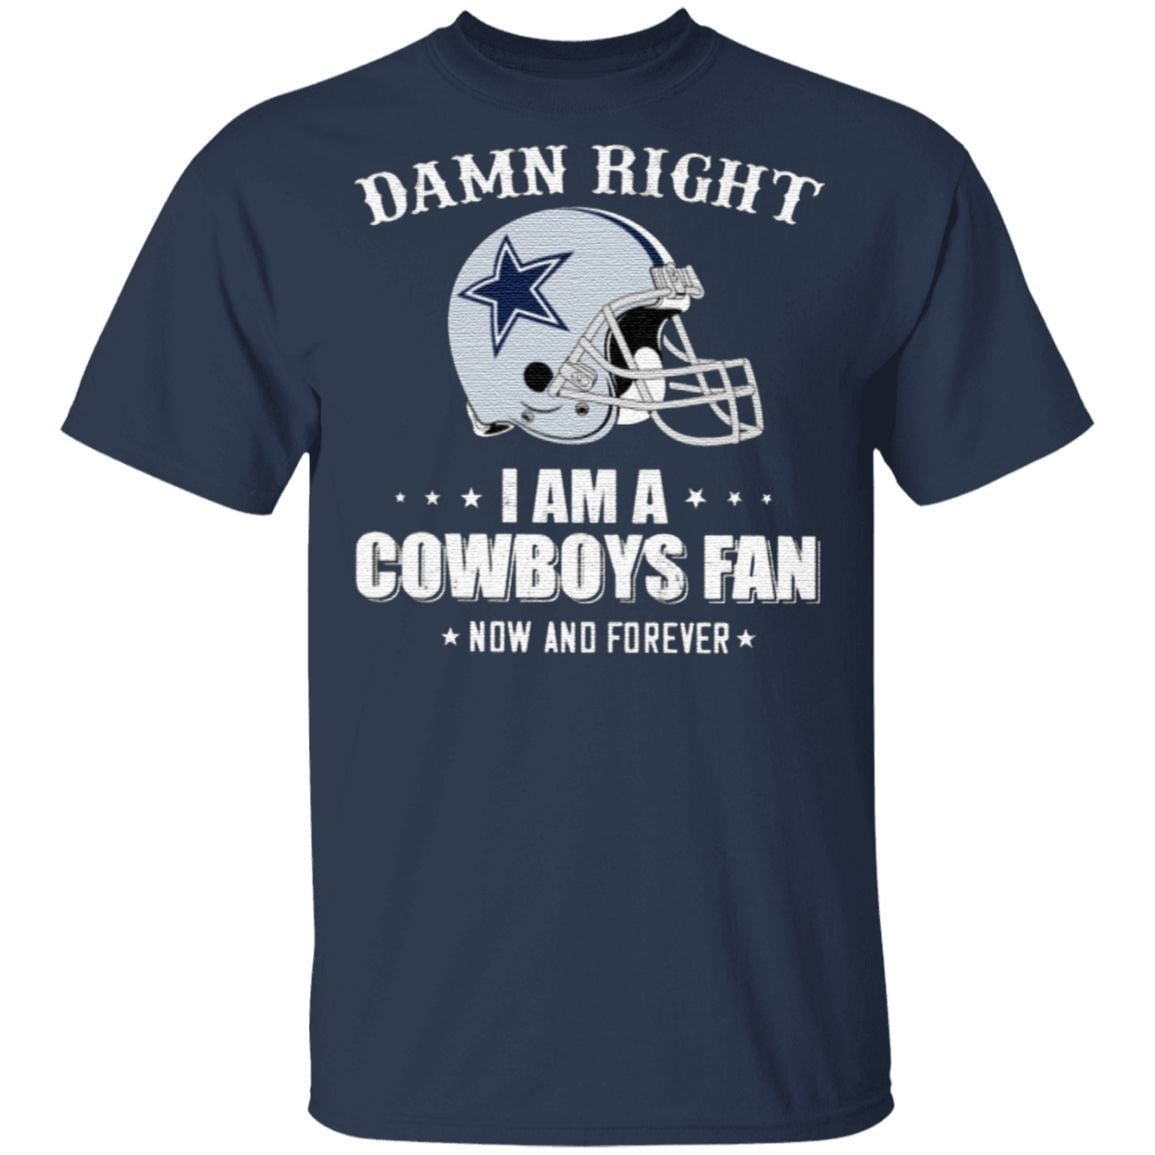 Damn Right I Am A Cowboys Fan Now And Forever shirt